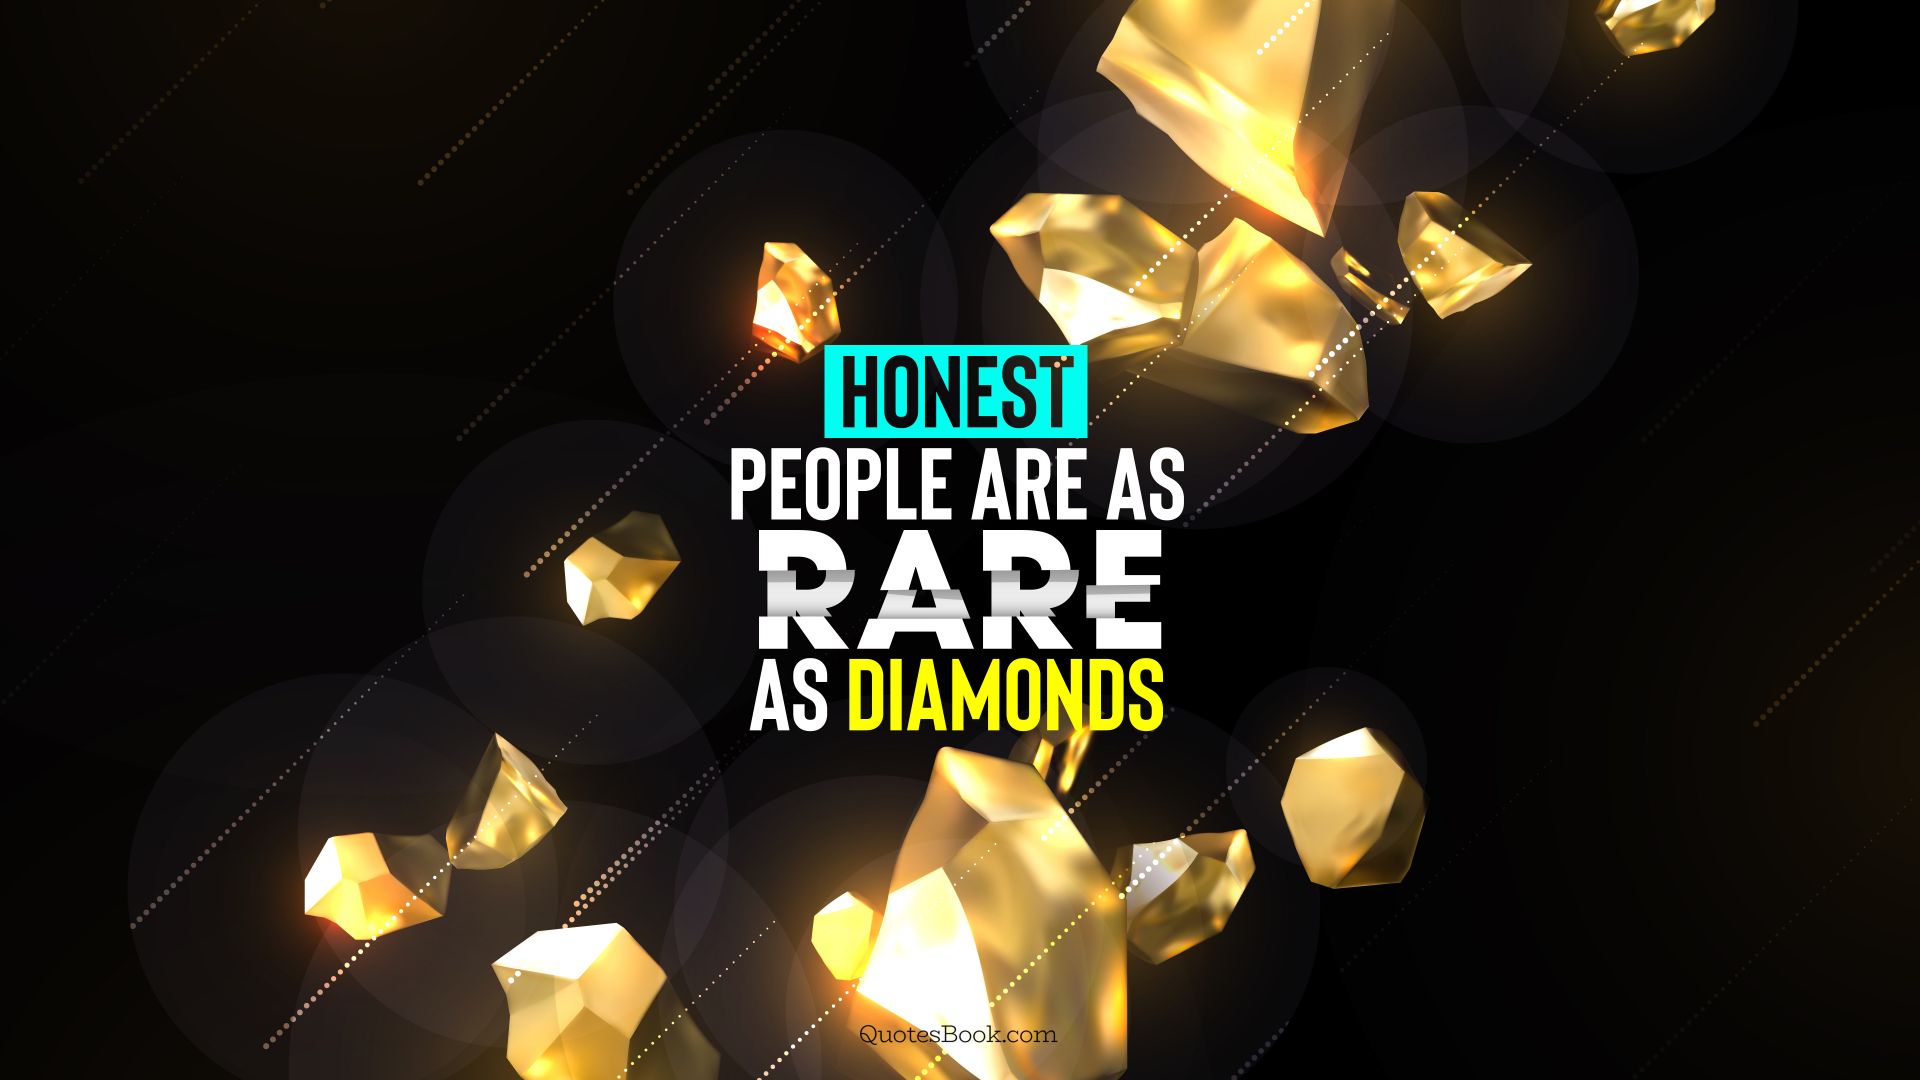 Honest people are as rare as diamonds. - Quote by QuotesBook